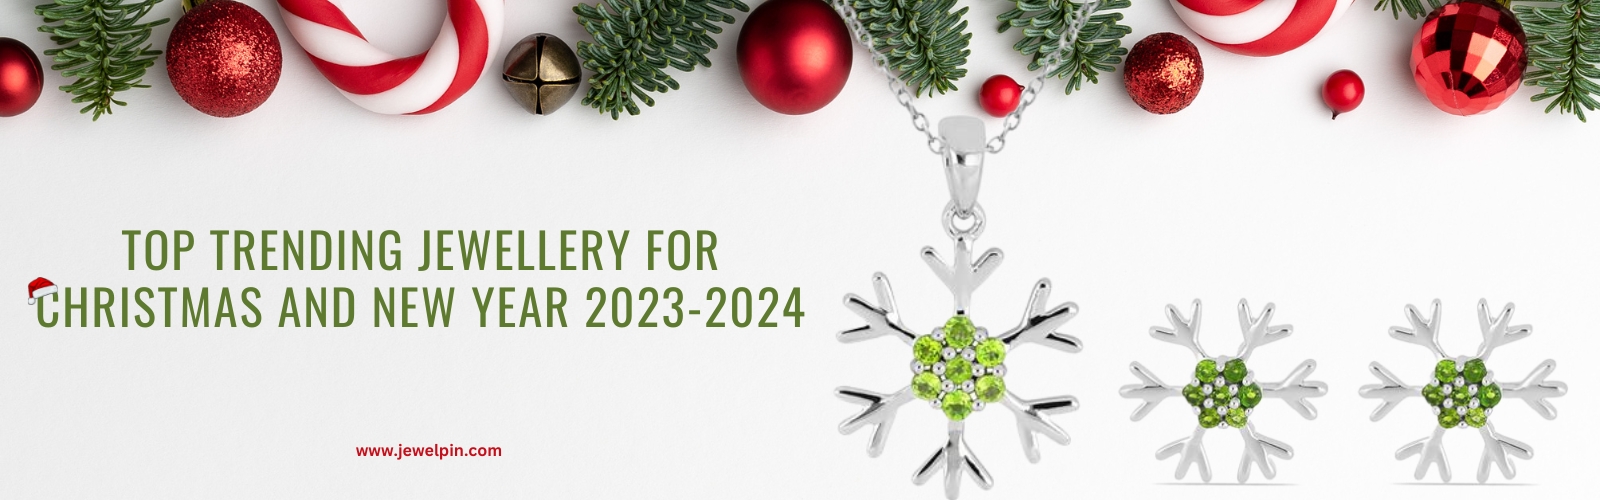 TOP TRENDING JEWELLERY FOR CHRISTMAS AND NEW YEAR 2023-2024